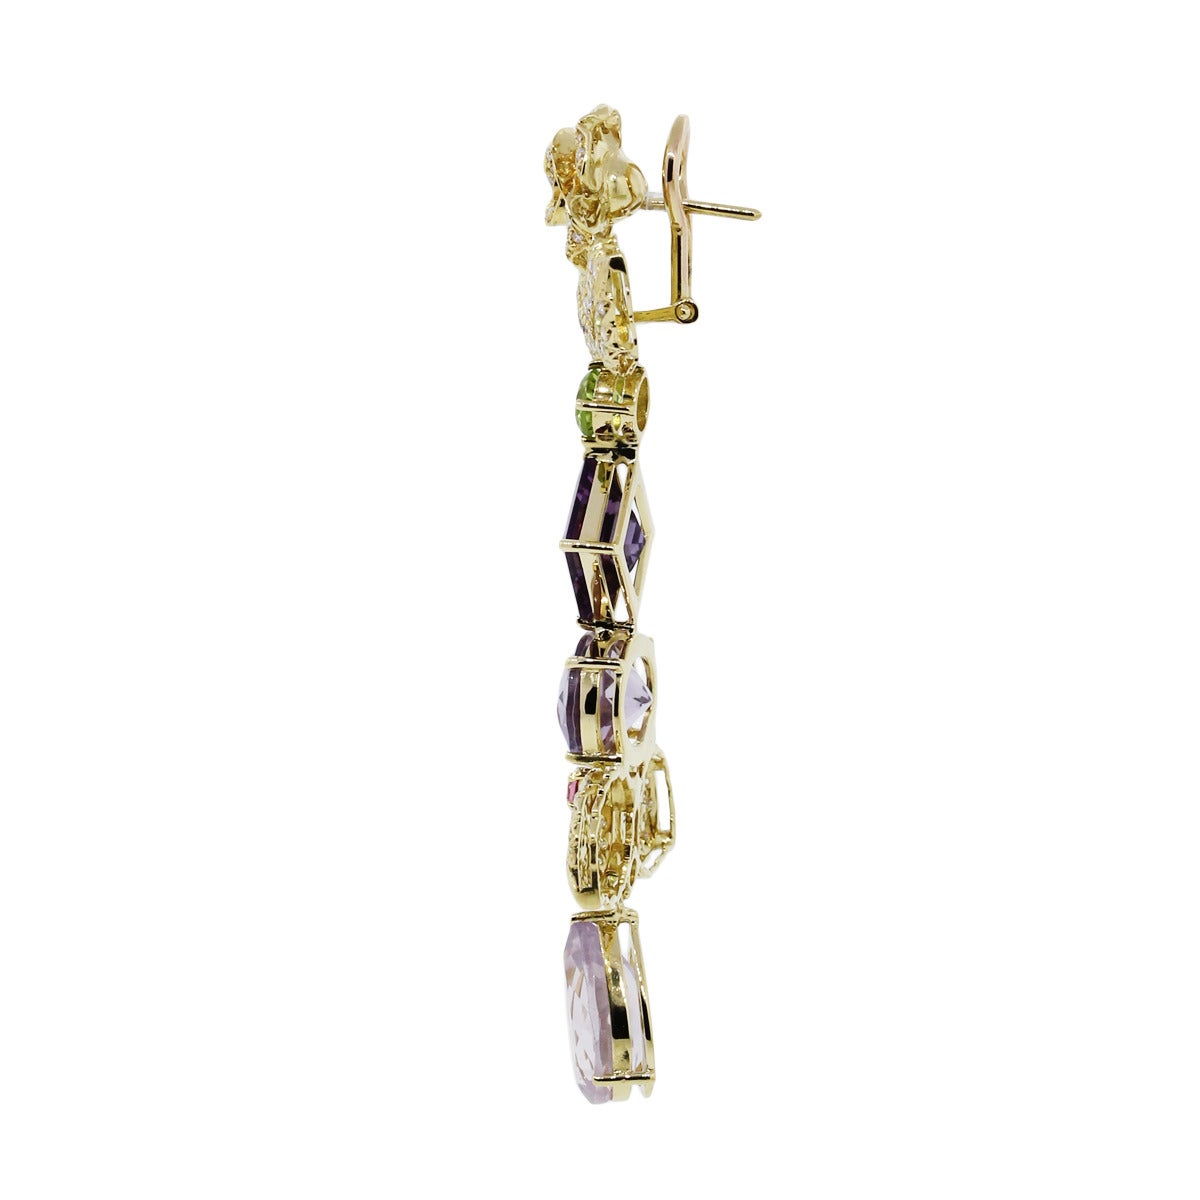 Style 18k Yellow Gold Multi Color Stone & Diamond Dangle Earrings
Diamond Approx. 2.8ctw. 
Measurements 3'' x 1.01'' x 0.26''
Material Yellow Gold
Backs Omega Back
Total Weight 30.7g (19.8dwt)
Additional Details Comes with Raymond Lee Jewelers